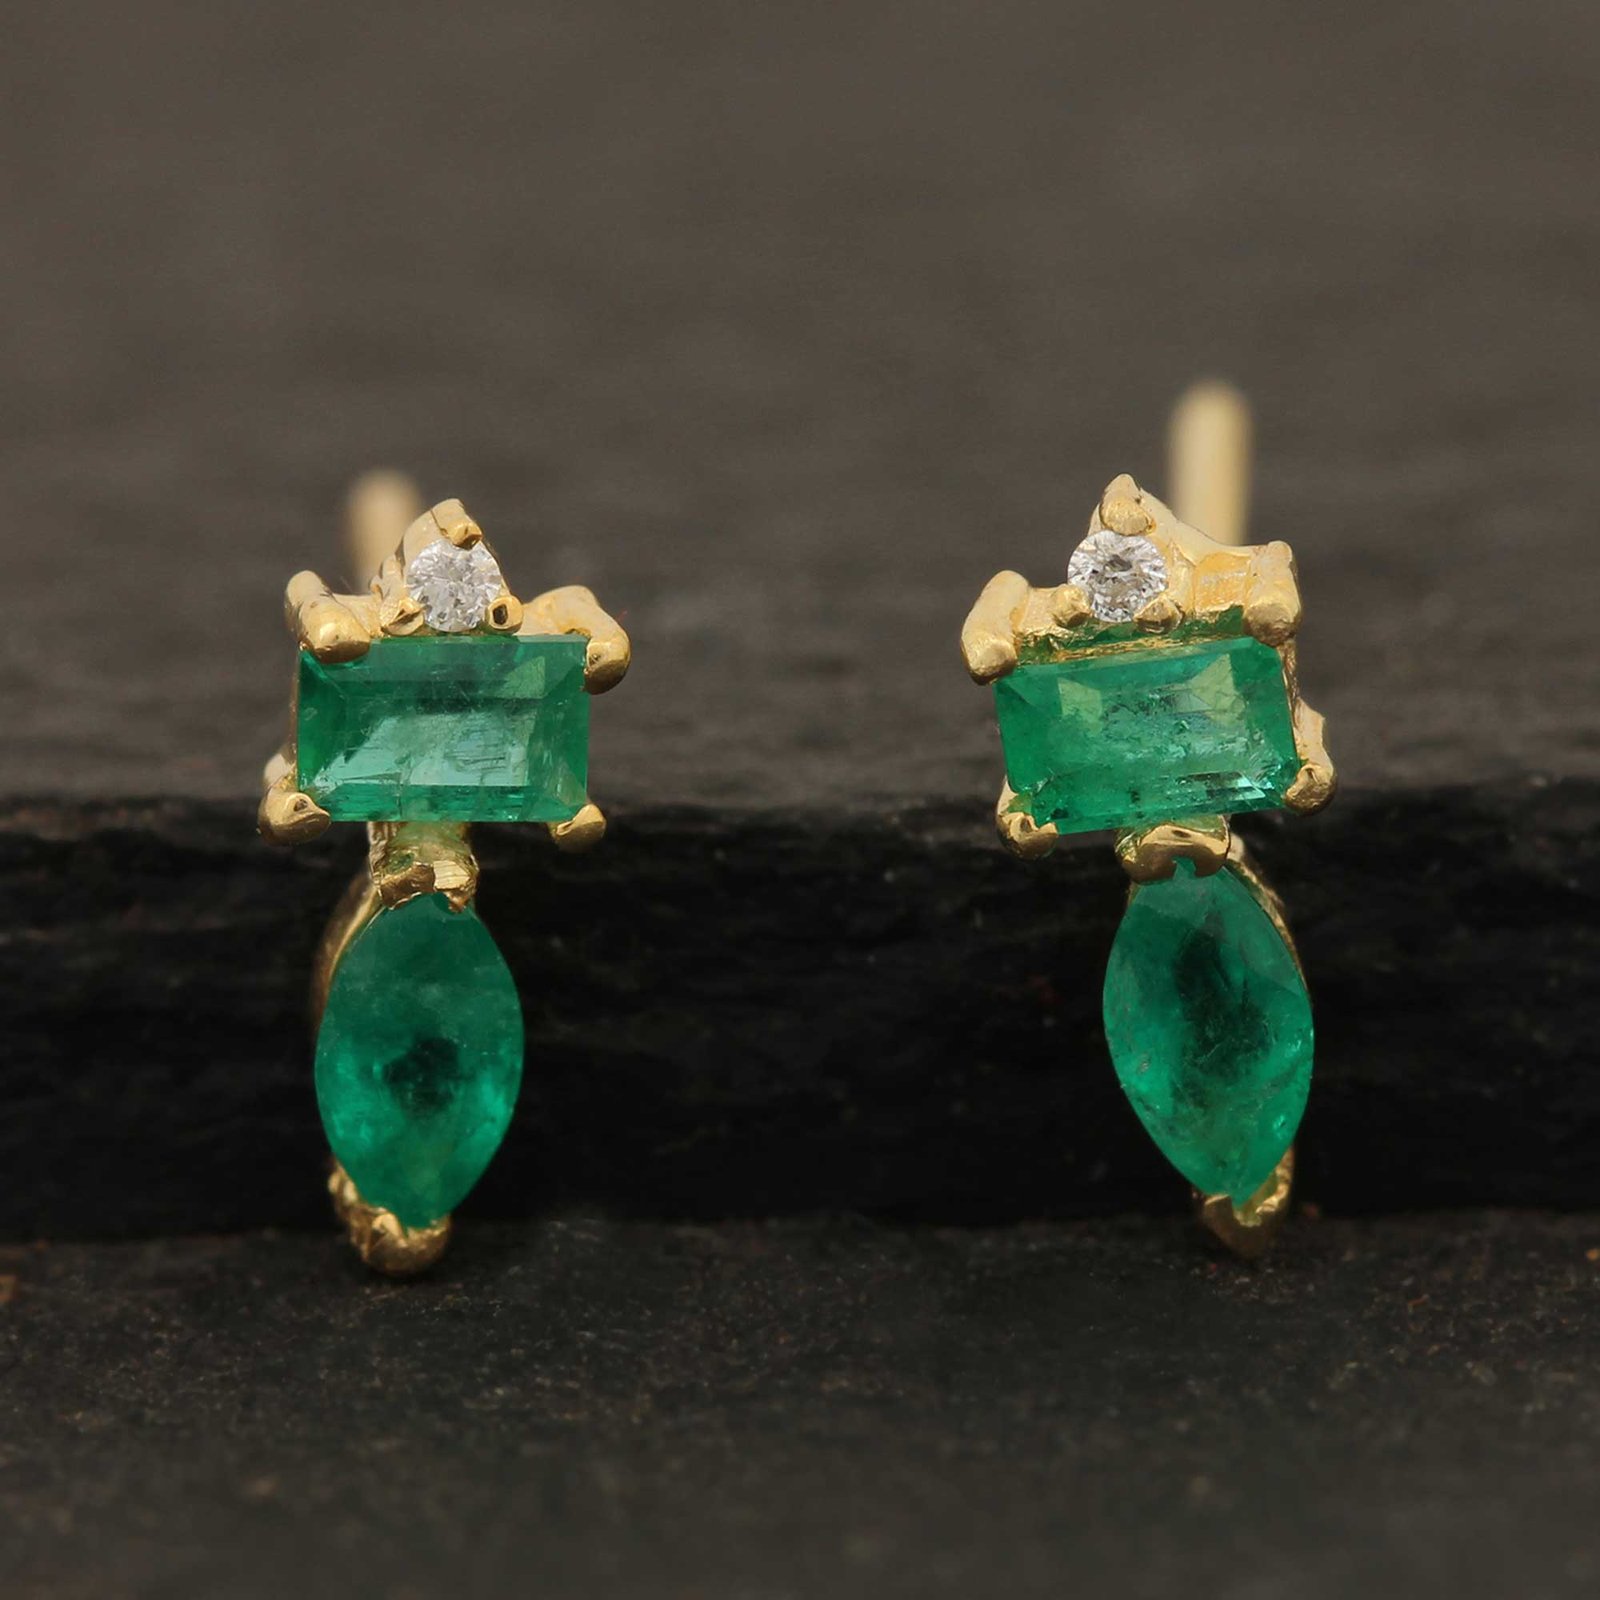 Solid 14k Gold Solitaire Stud Earrings Adorned With Diamond & Emerald